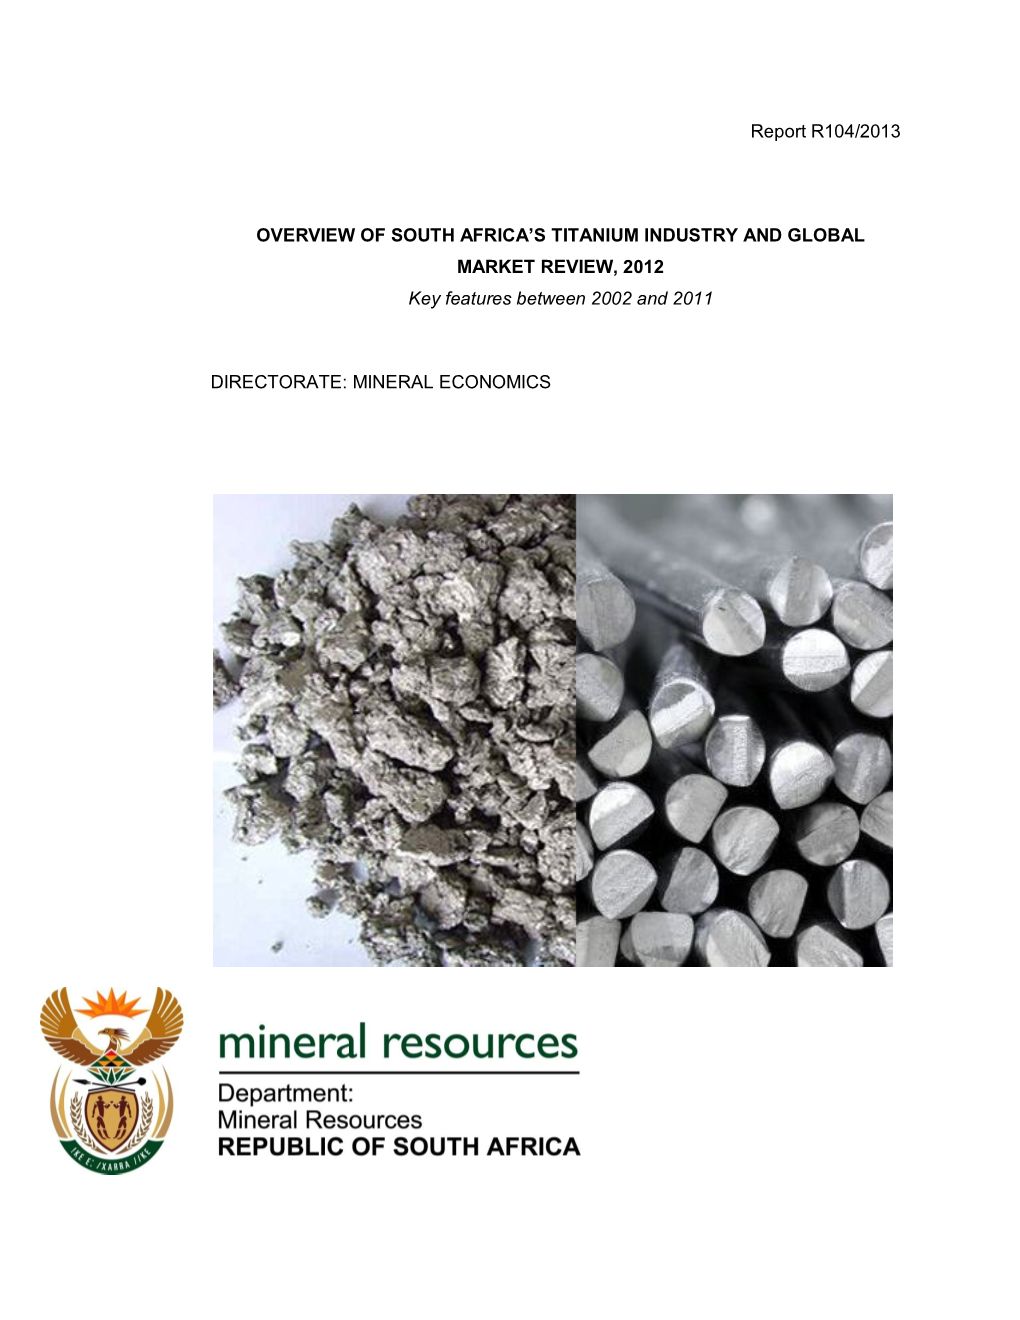 Report R104/2013 OVERVIEW of SOUTH AFRICA's TITANIUM